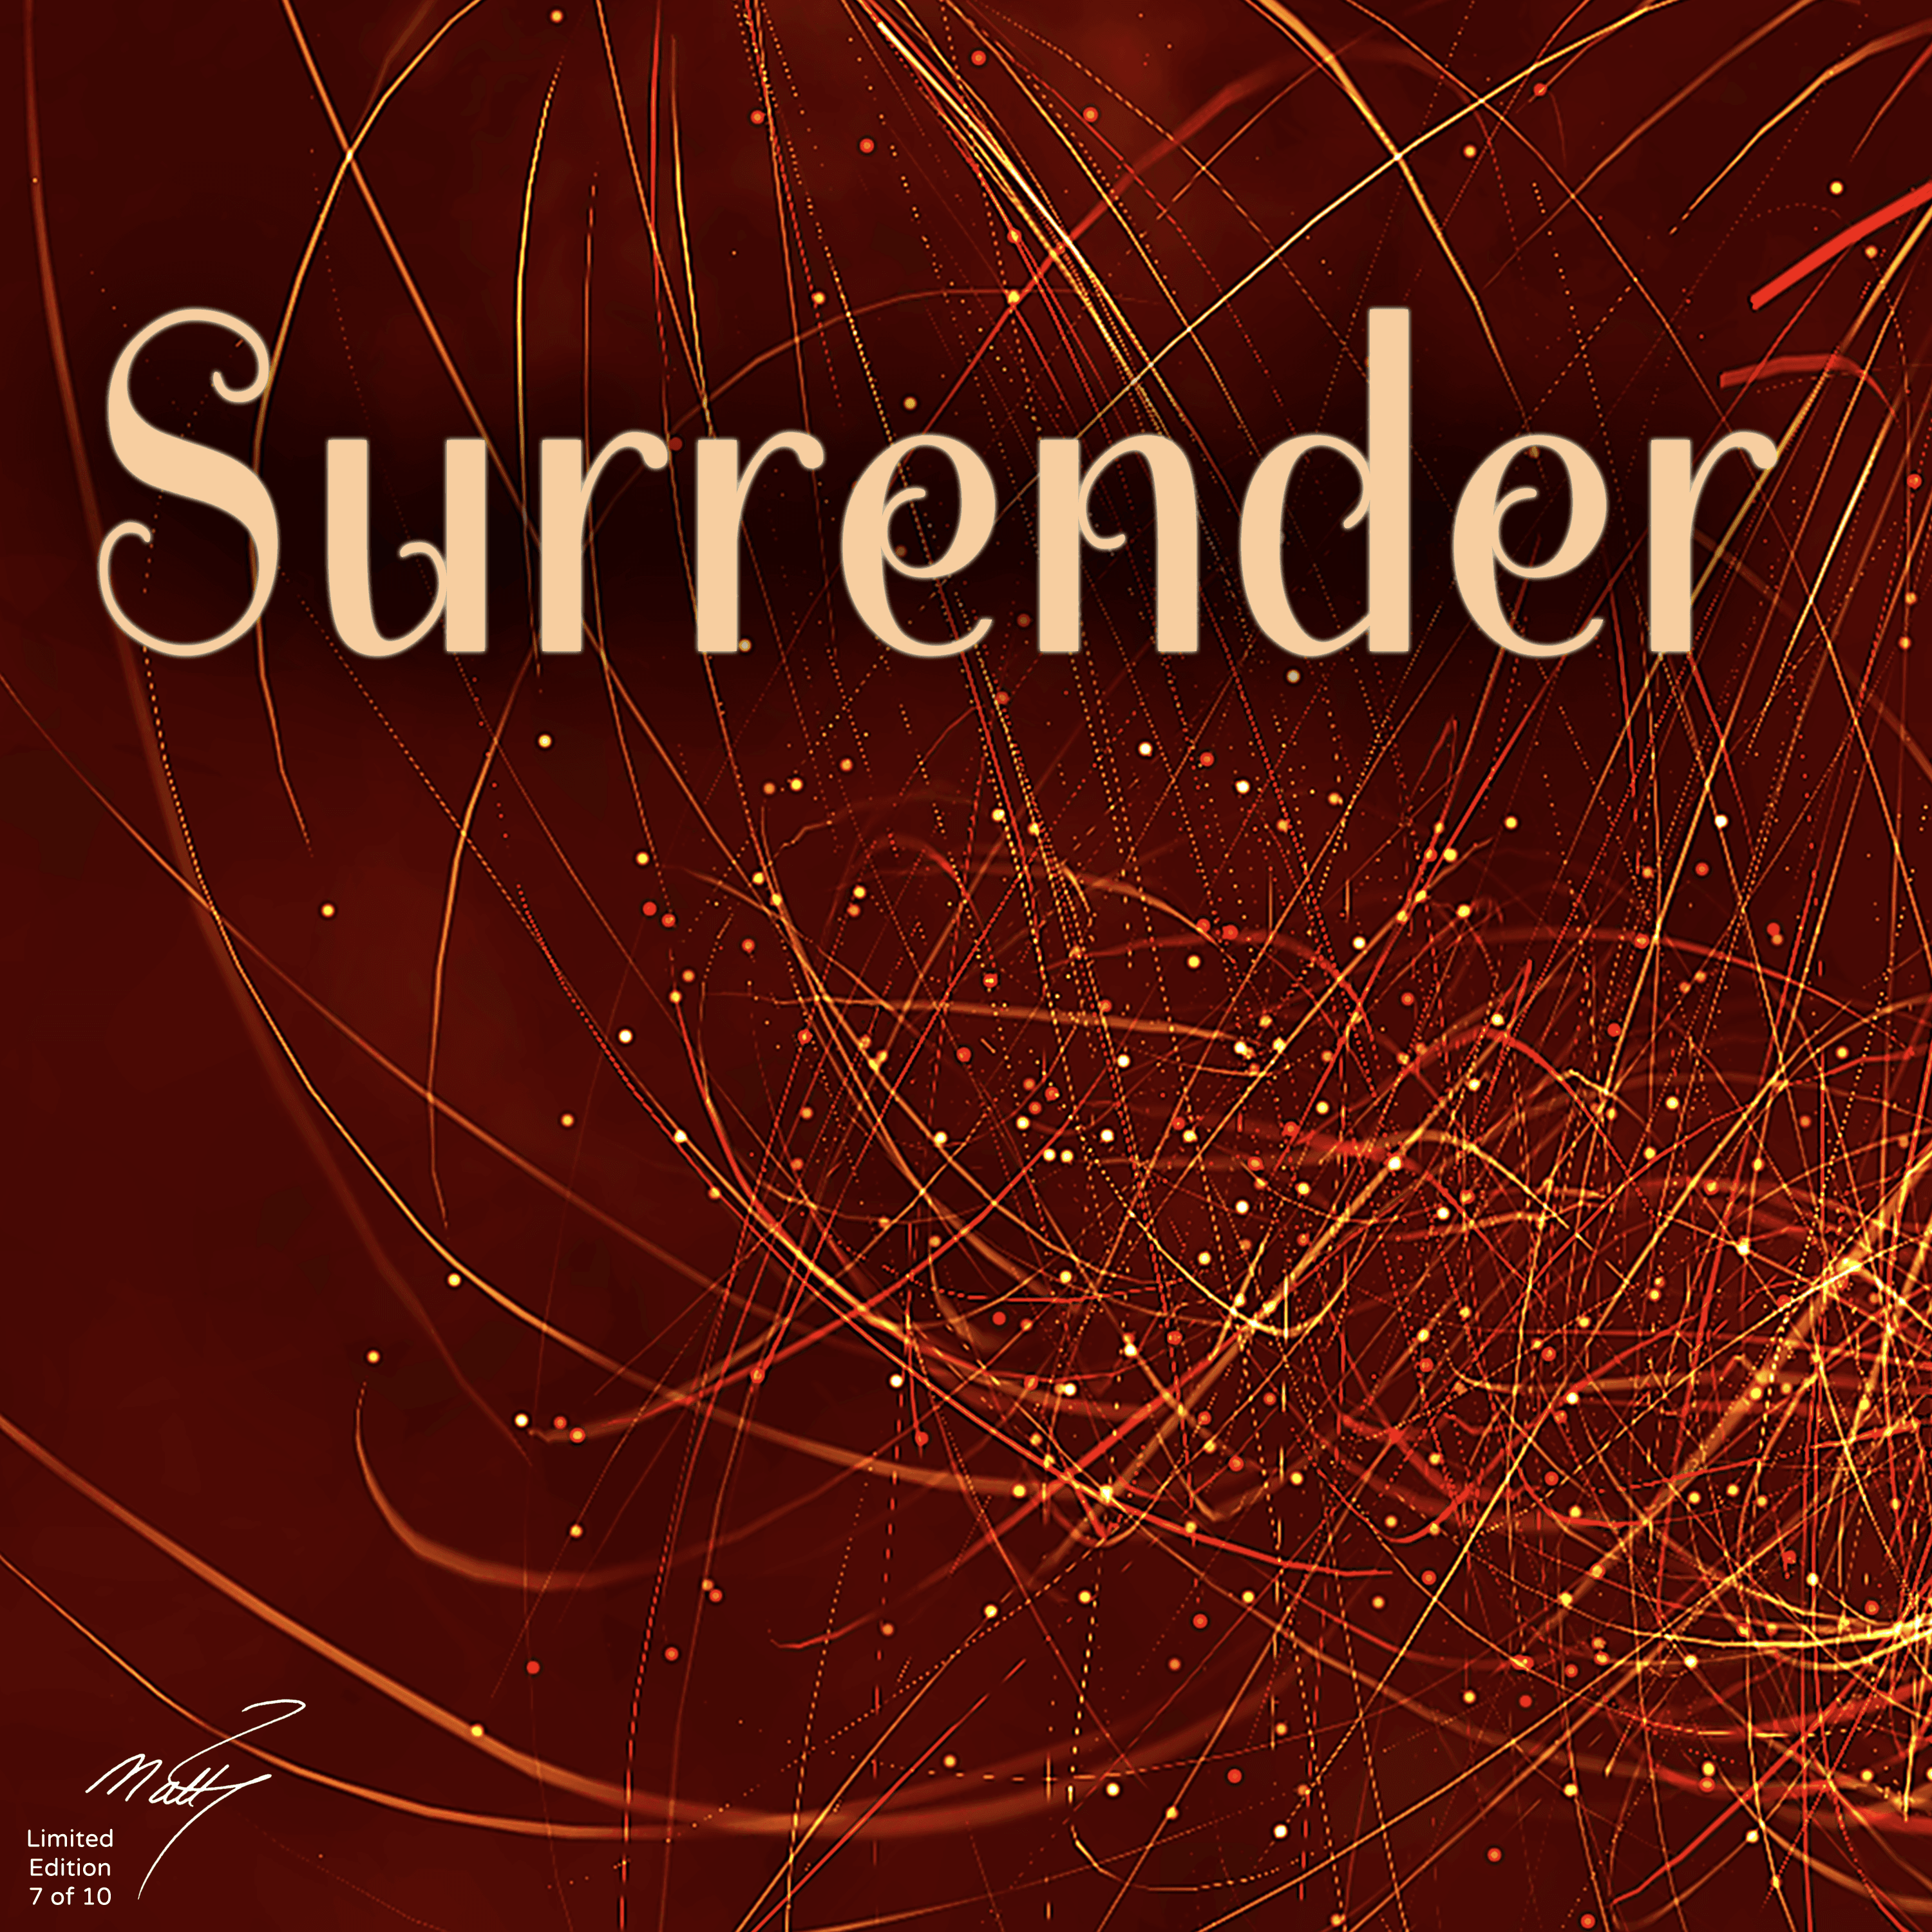 "Surrender" by Matt Johnson-Autographed Limited Edition (7 of 10)